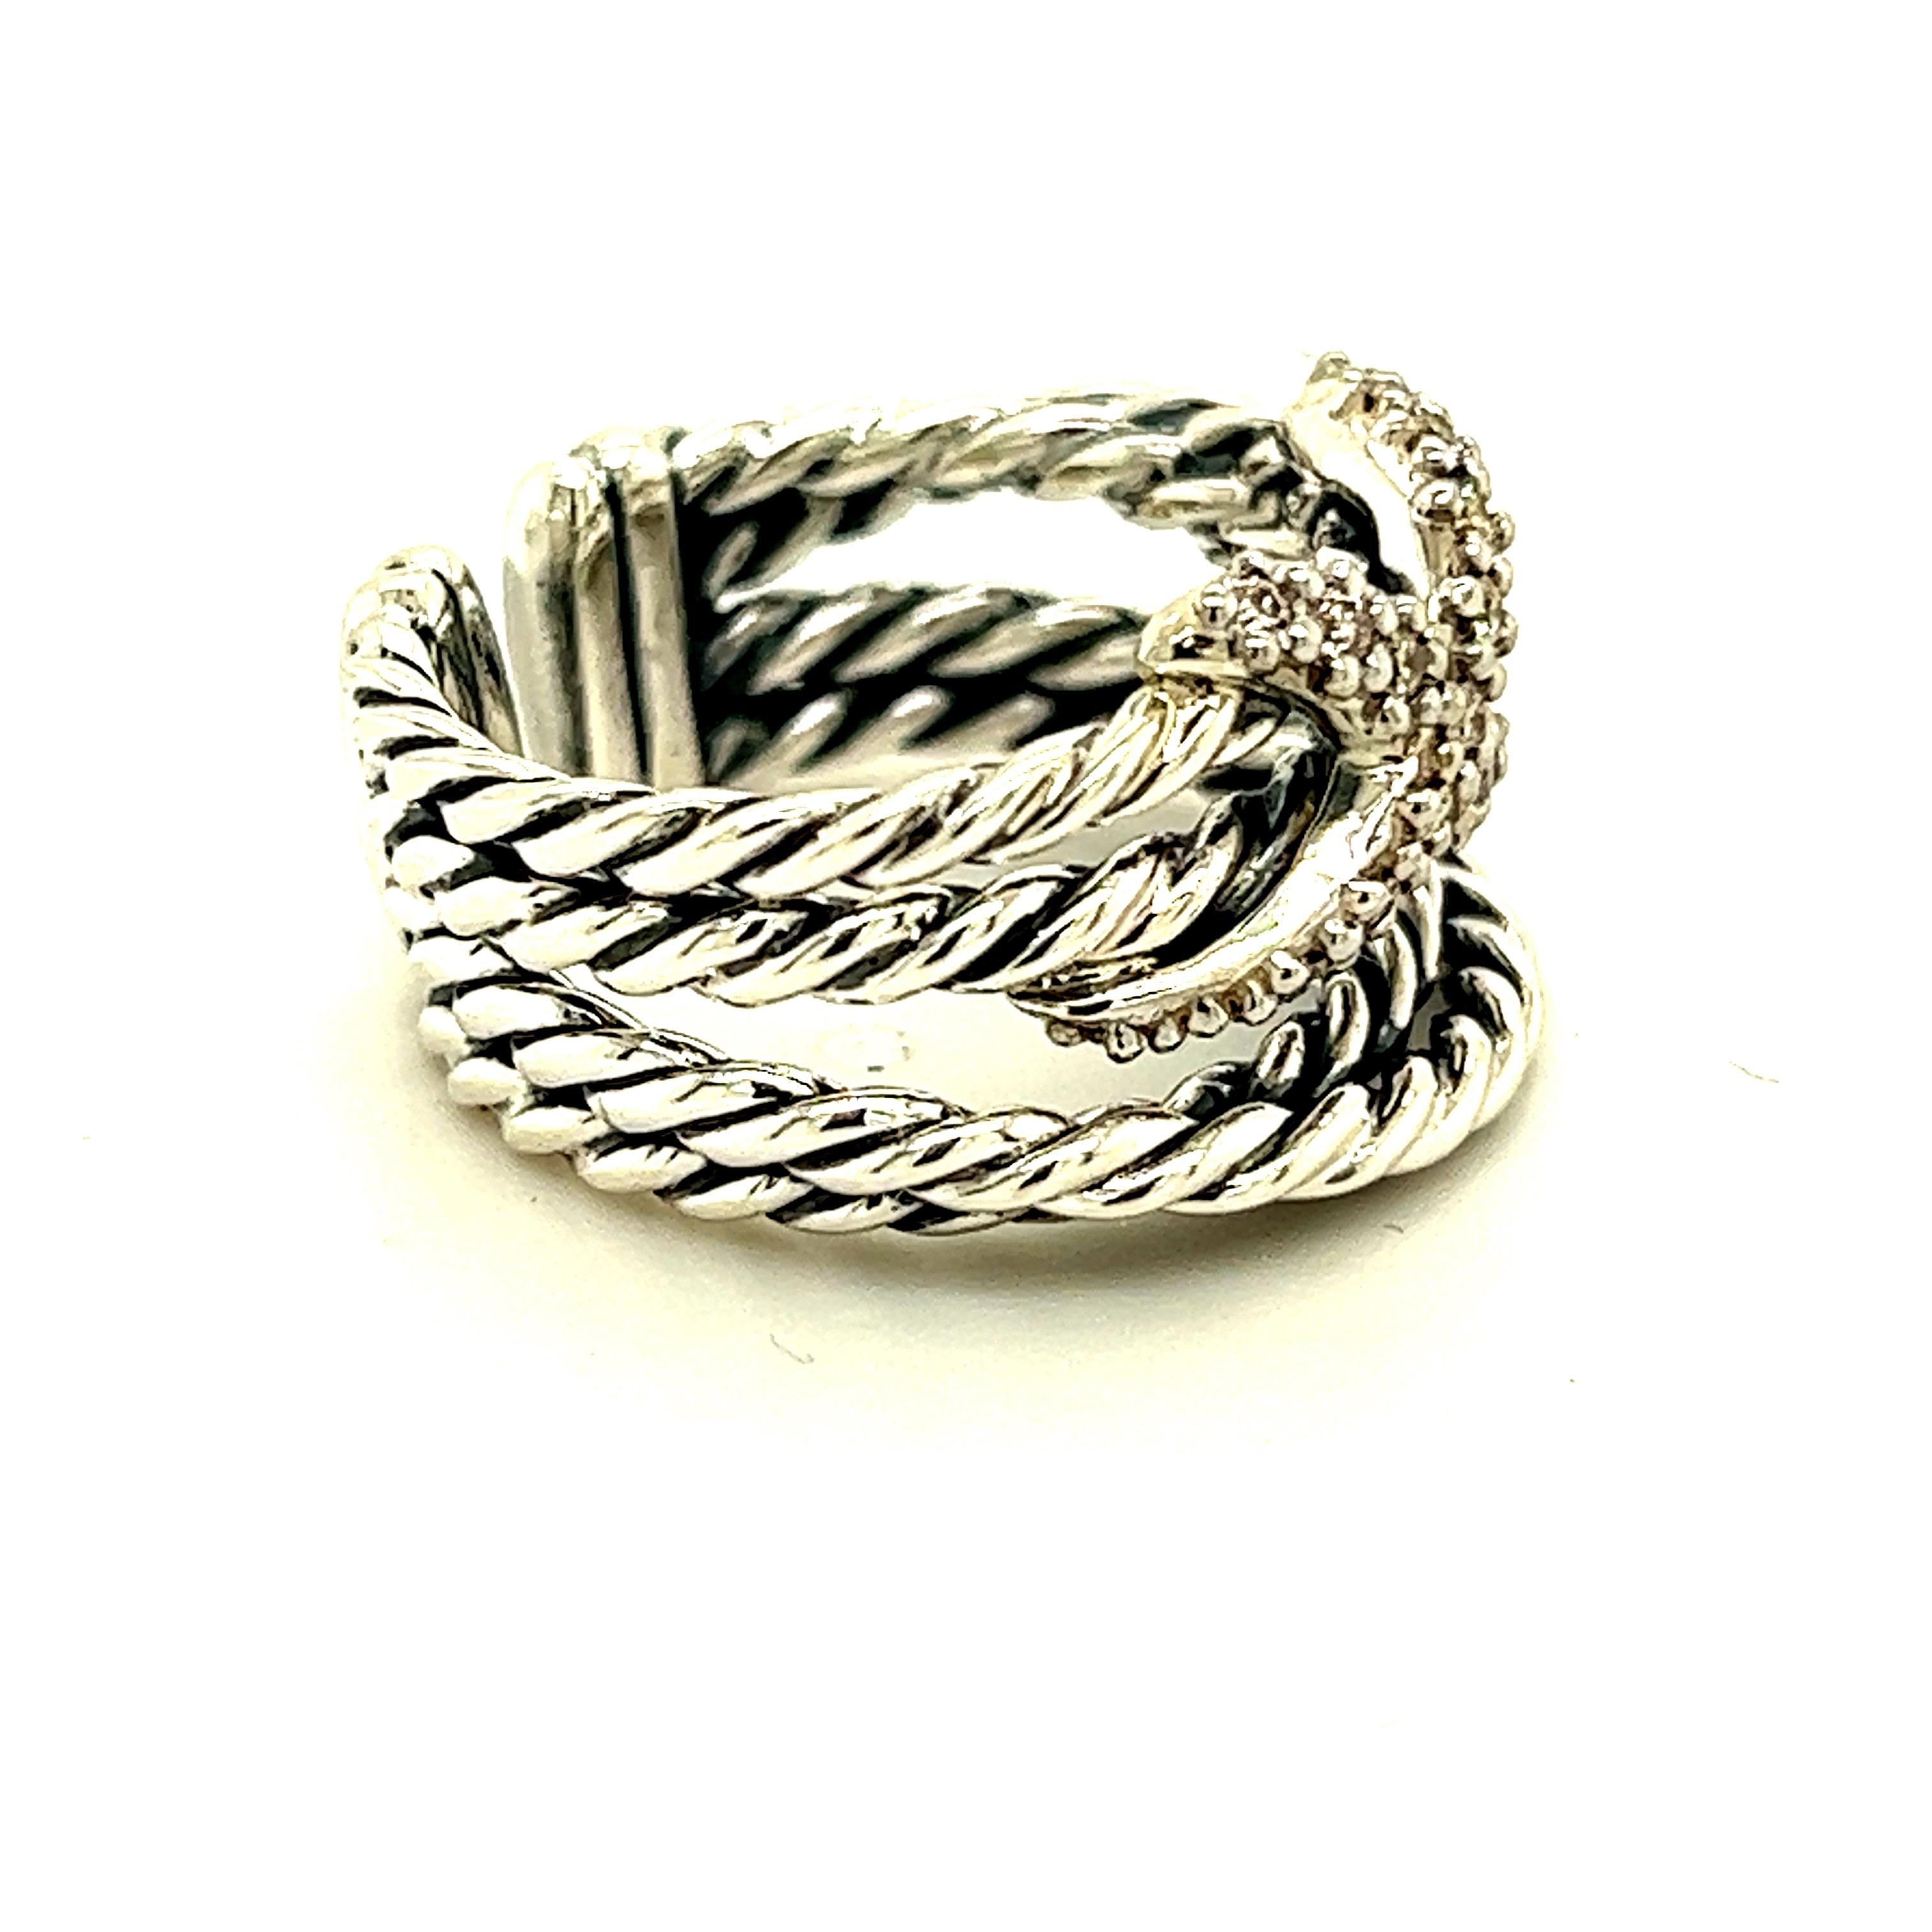 Authentic David Yurman Estate Expandable X Crossover Diamond Ring 6 Silver 0.15 Cts Height 14 mm DY227

Expandable One Size Up or Down

Retail: $1,290

TRUSTED SELLER SINCE 2002

PLEASE SEE OUR HUNDREDS OF POSITIVE FEEDBACKS FROM OUR CLIENTS!!

FREE